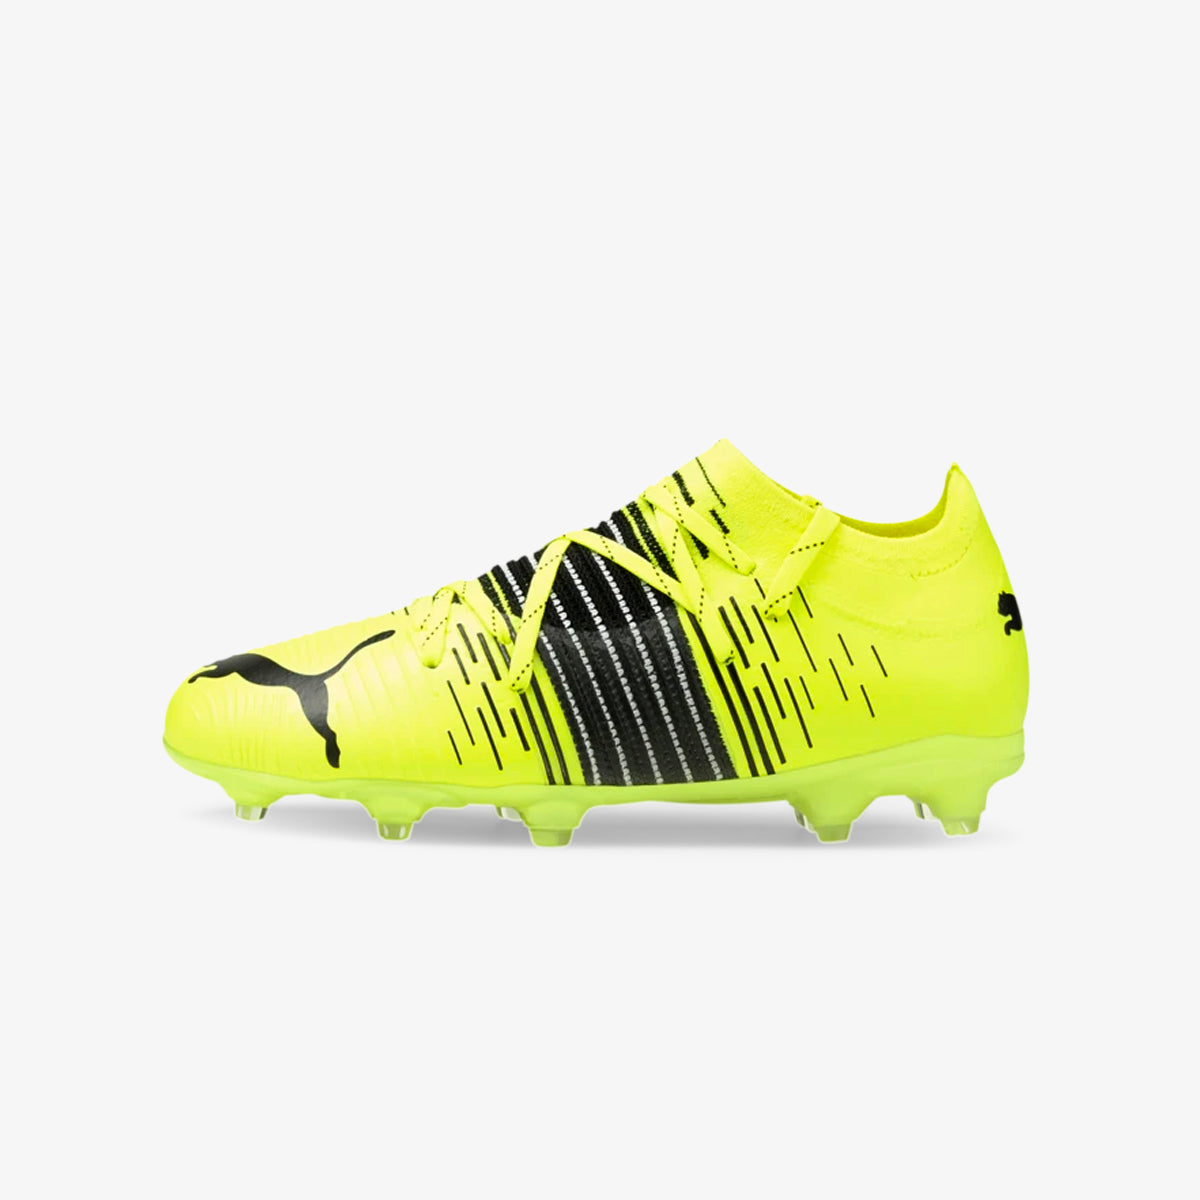 Puma Future Z 2 1 Firm Ground Soccer Shoe Youth